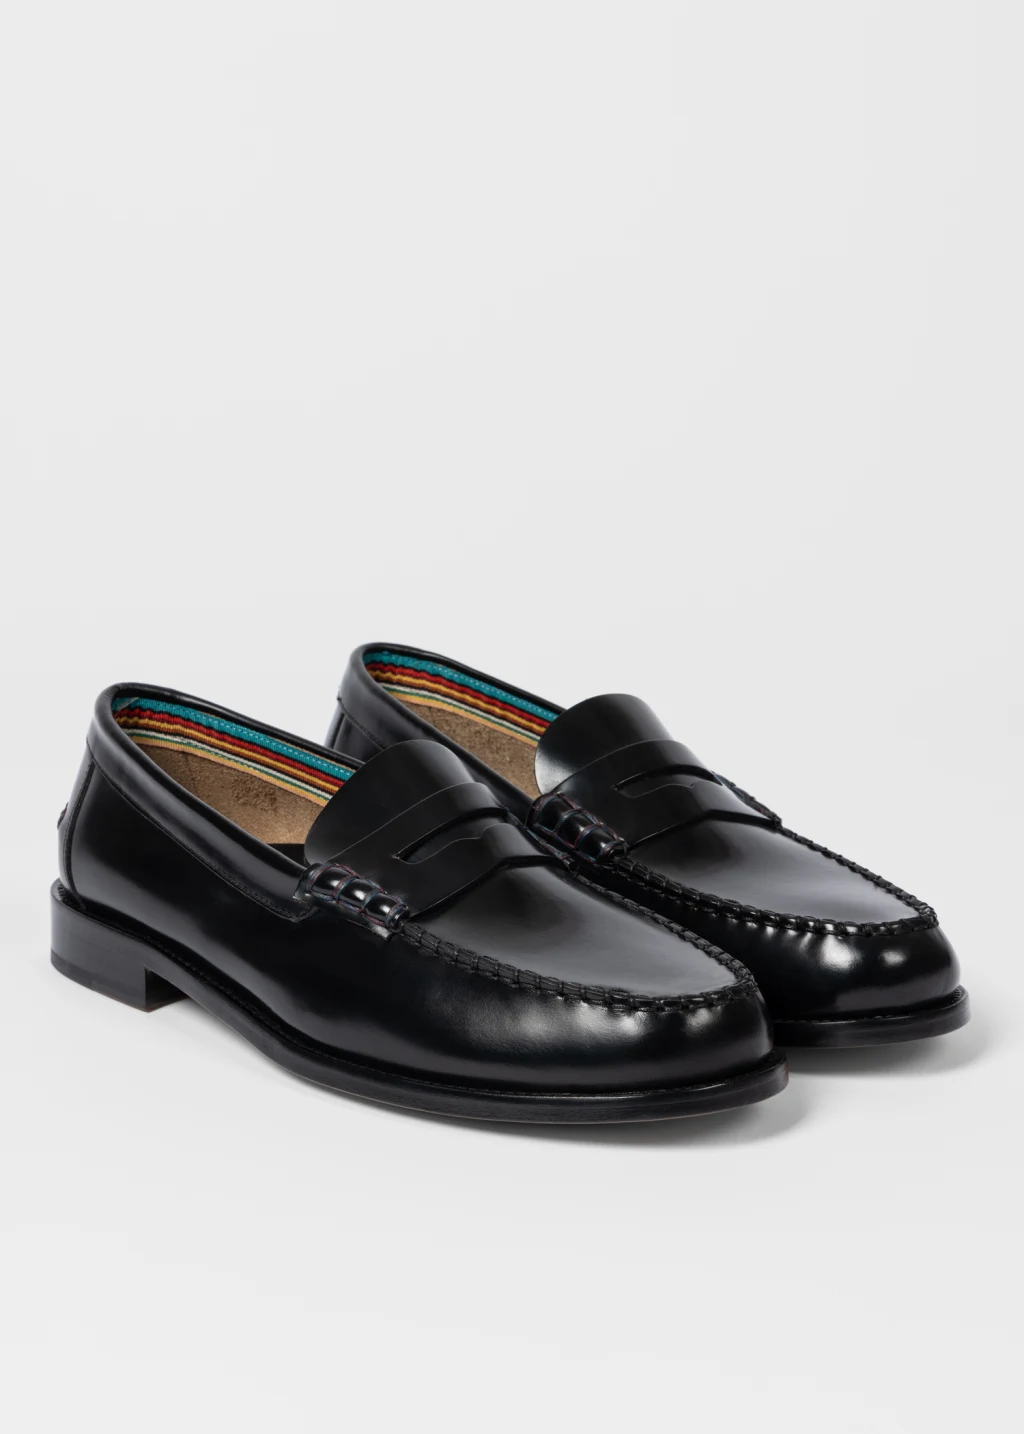 Men's Black Leather 'Lido' Loafers